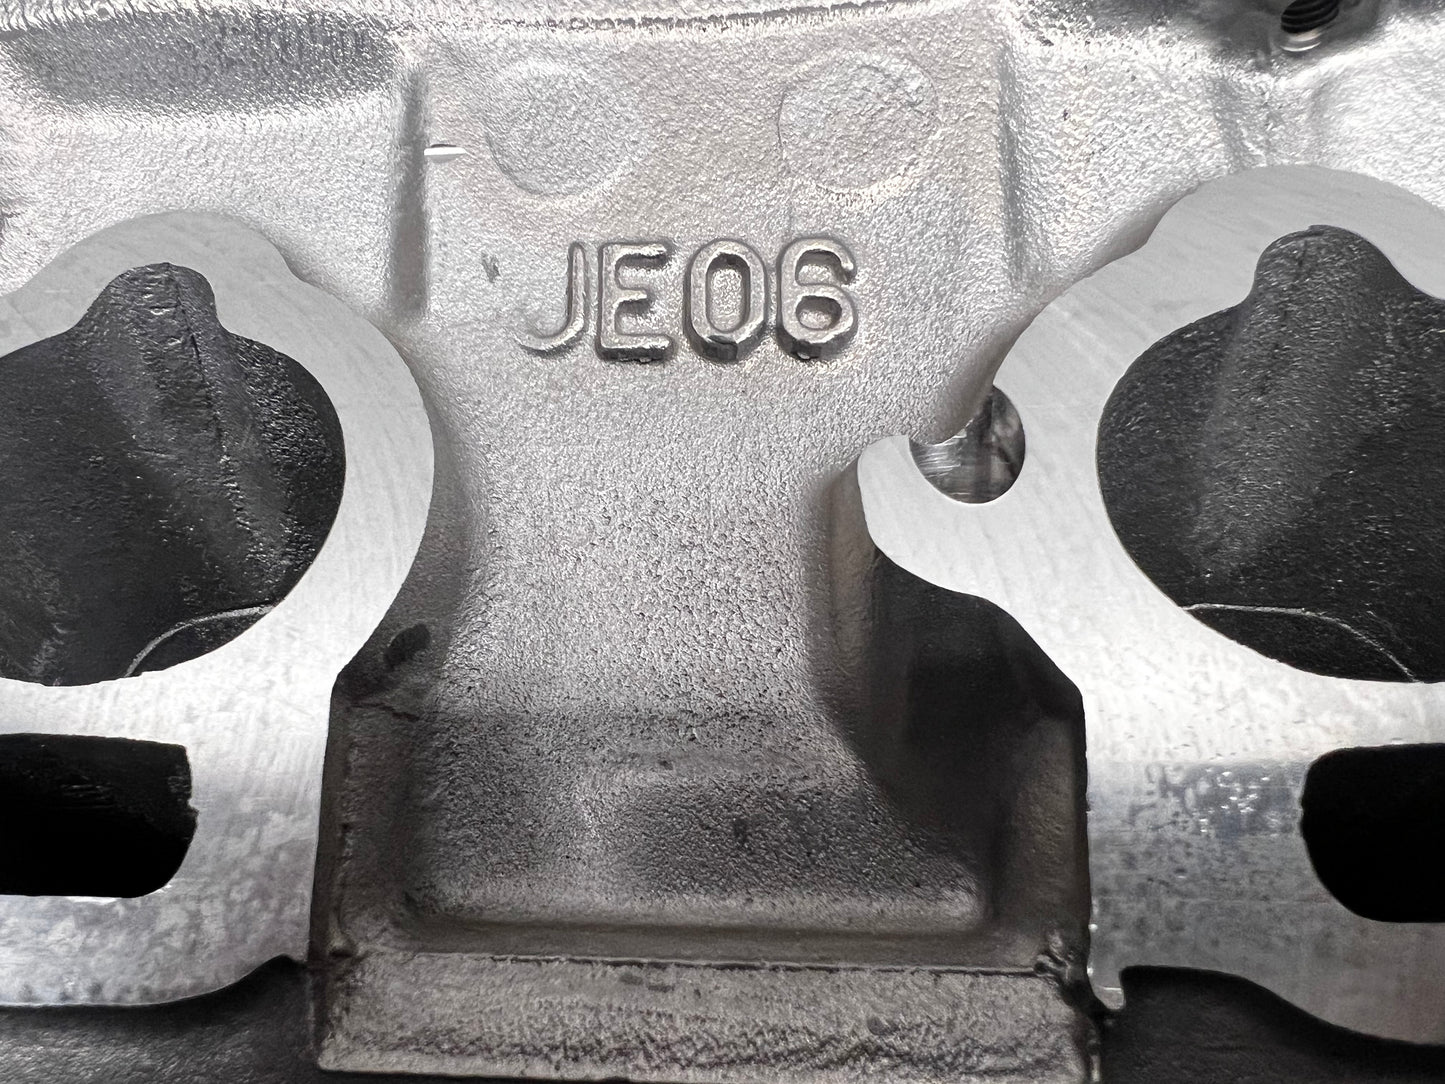 Casting number of cylinder head for a NEW Mazda 3.0L Casting #JE06 (SOLD IN PAIR)